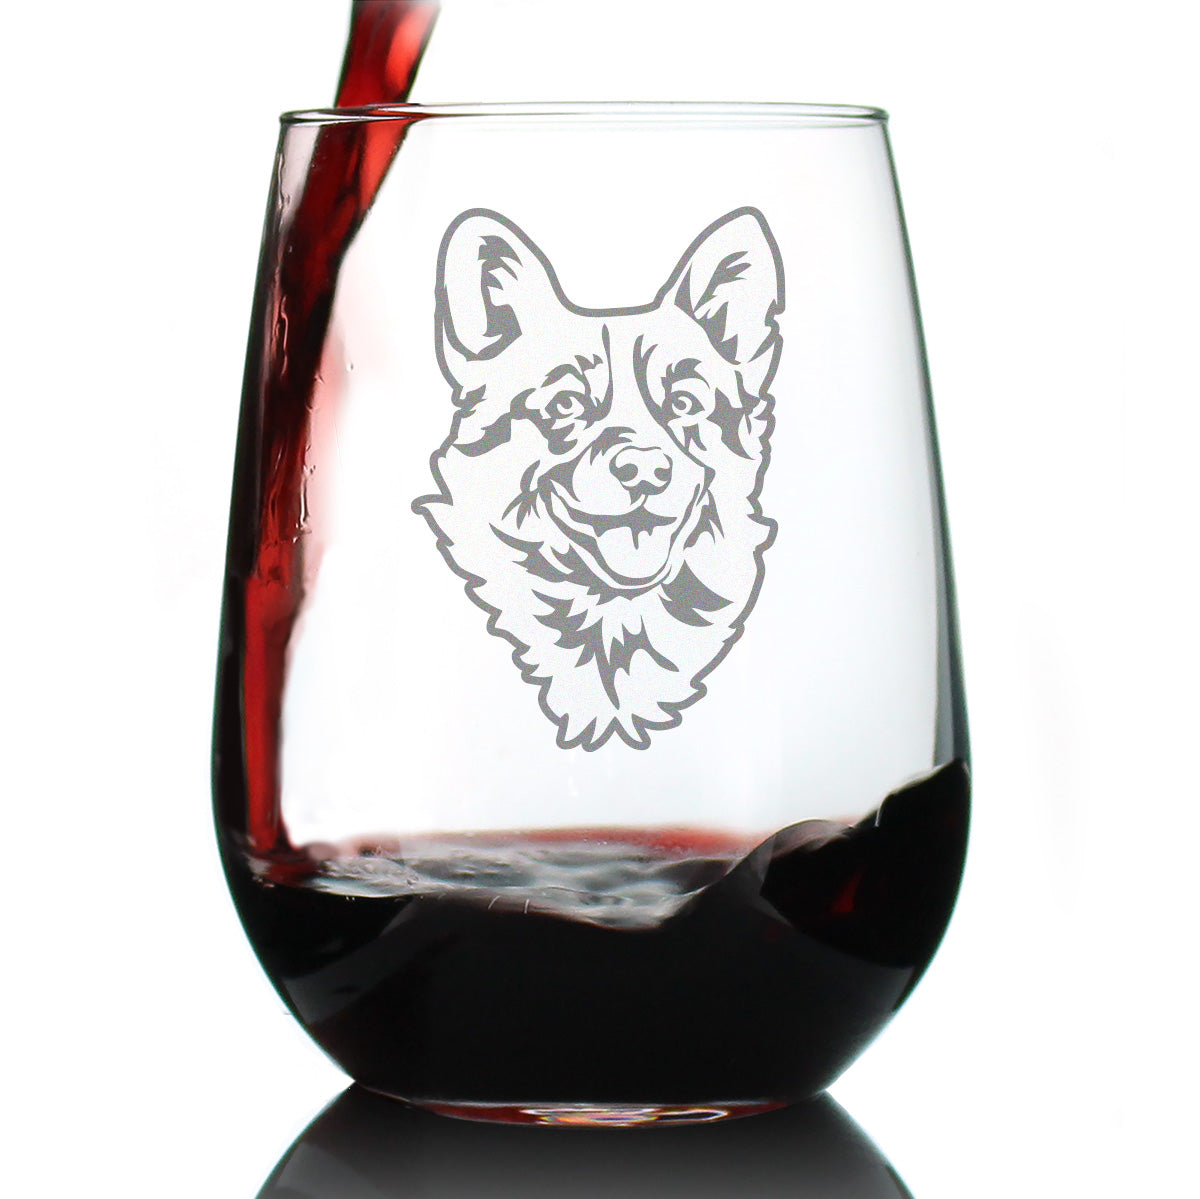 Corgi Face Stemless Wine Glass - Cute Dog Themed Decor and Gifts for Moms &amp; Dads of Welsh Corgies - Large 17 Oz